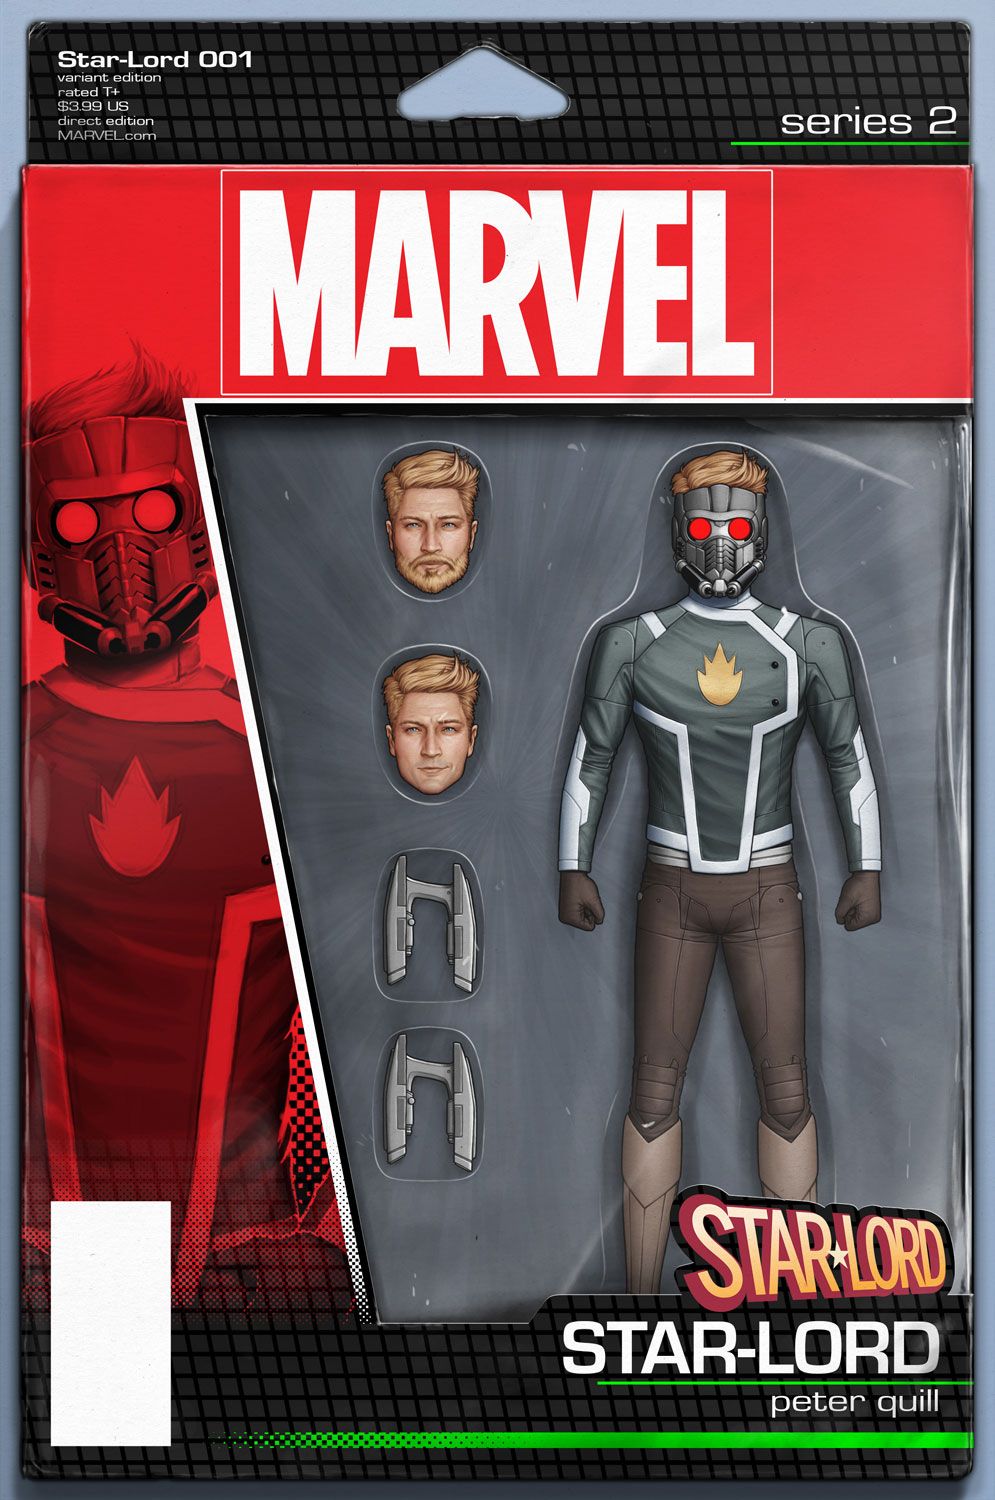 star-lord_1_christopher_action_figure_variant